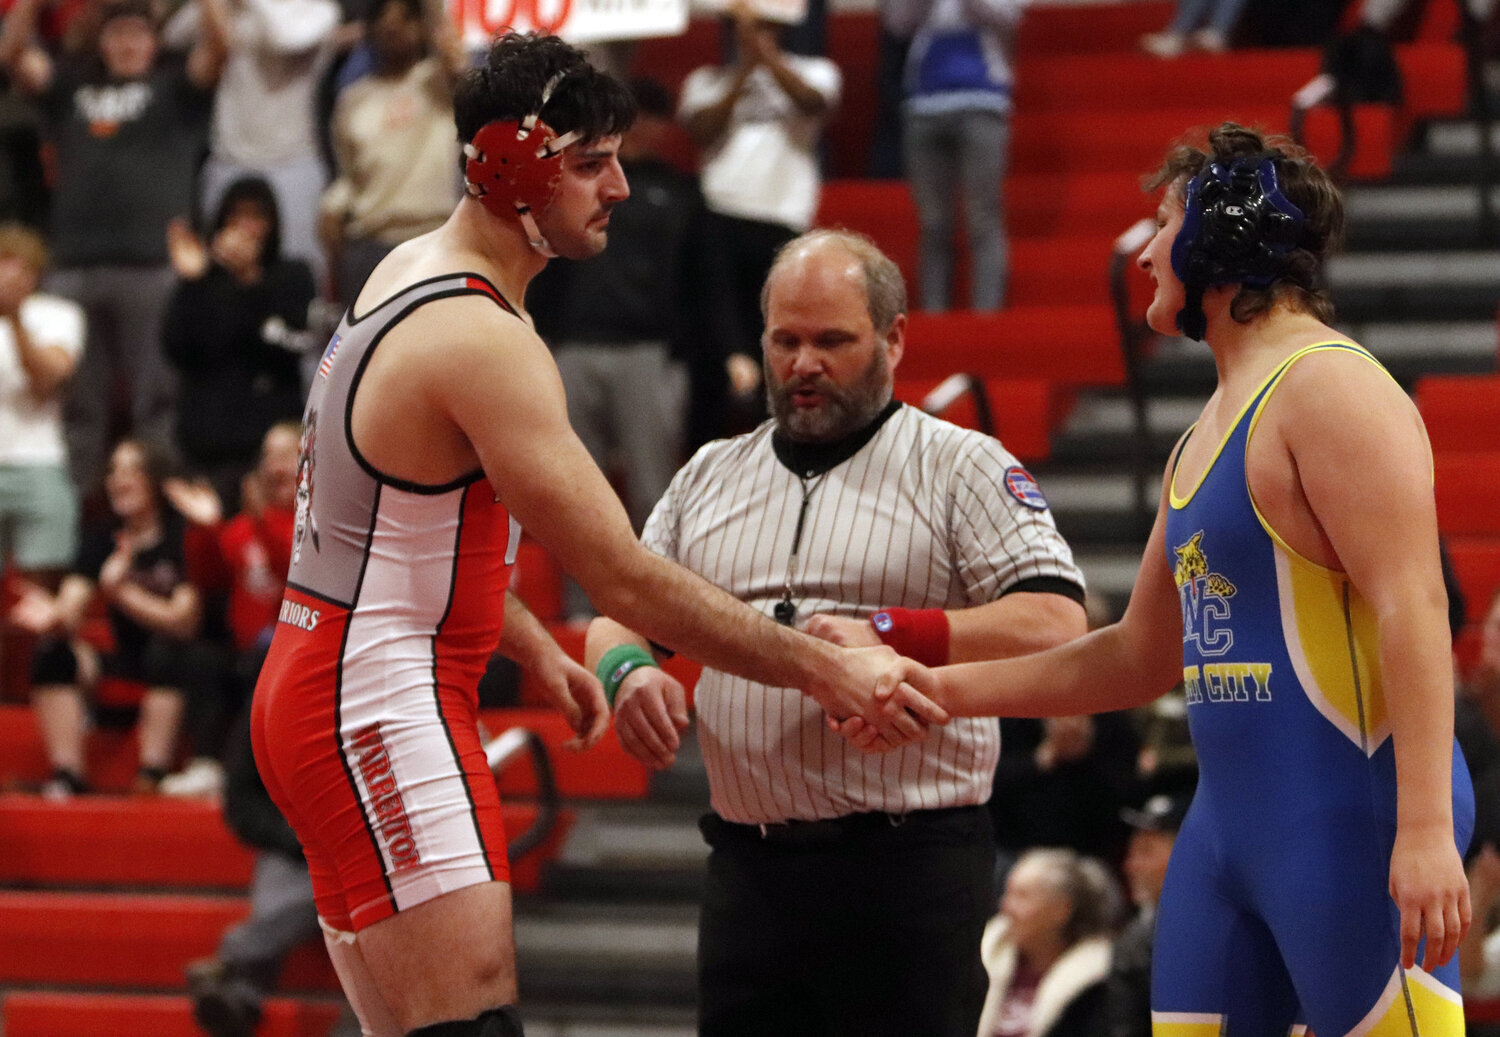 Jacob Ruff, left, shakes hands with Quincy Rice after Ruff earned his 100th win.